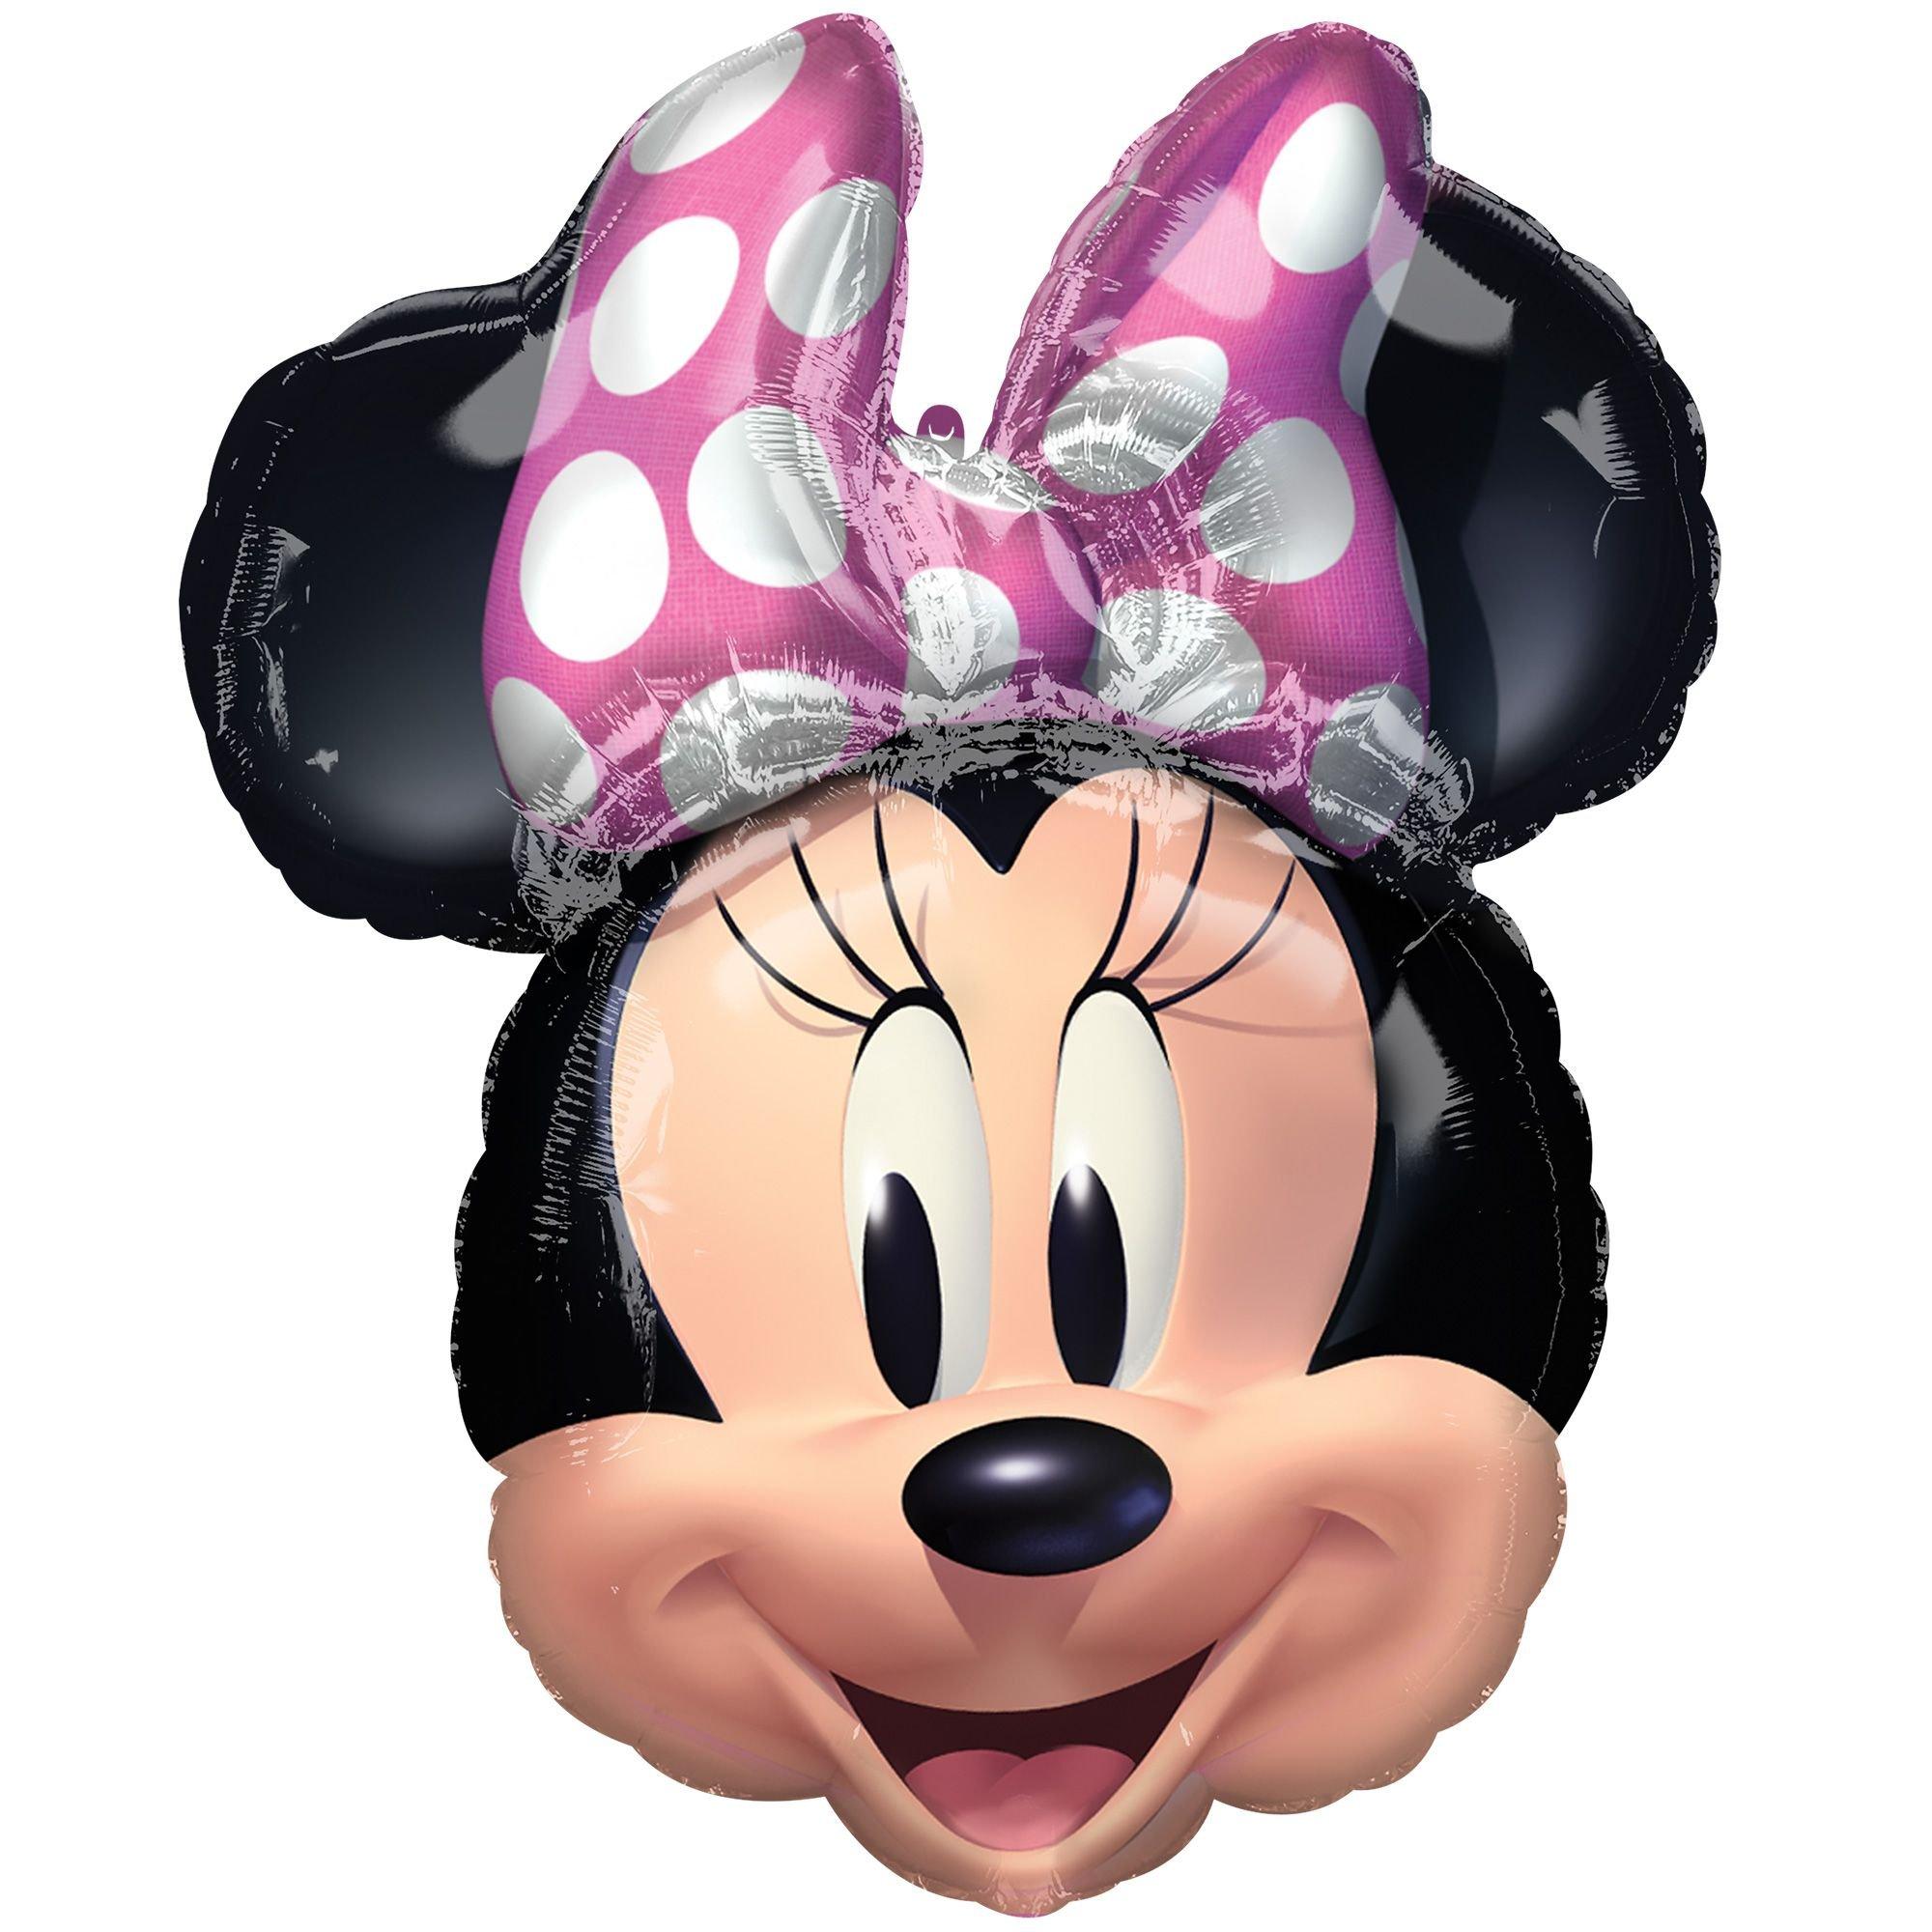 Air-Filled Sitting Minnie Mouse Balloon, 21in